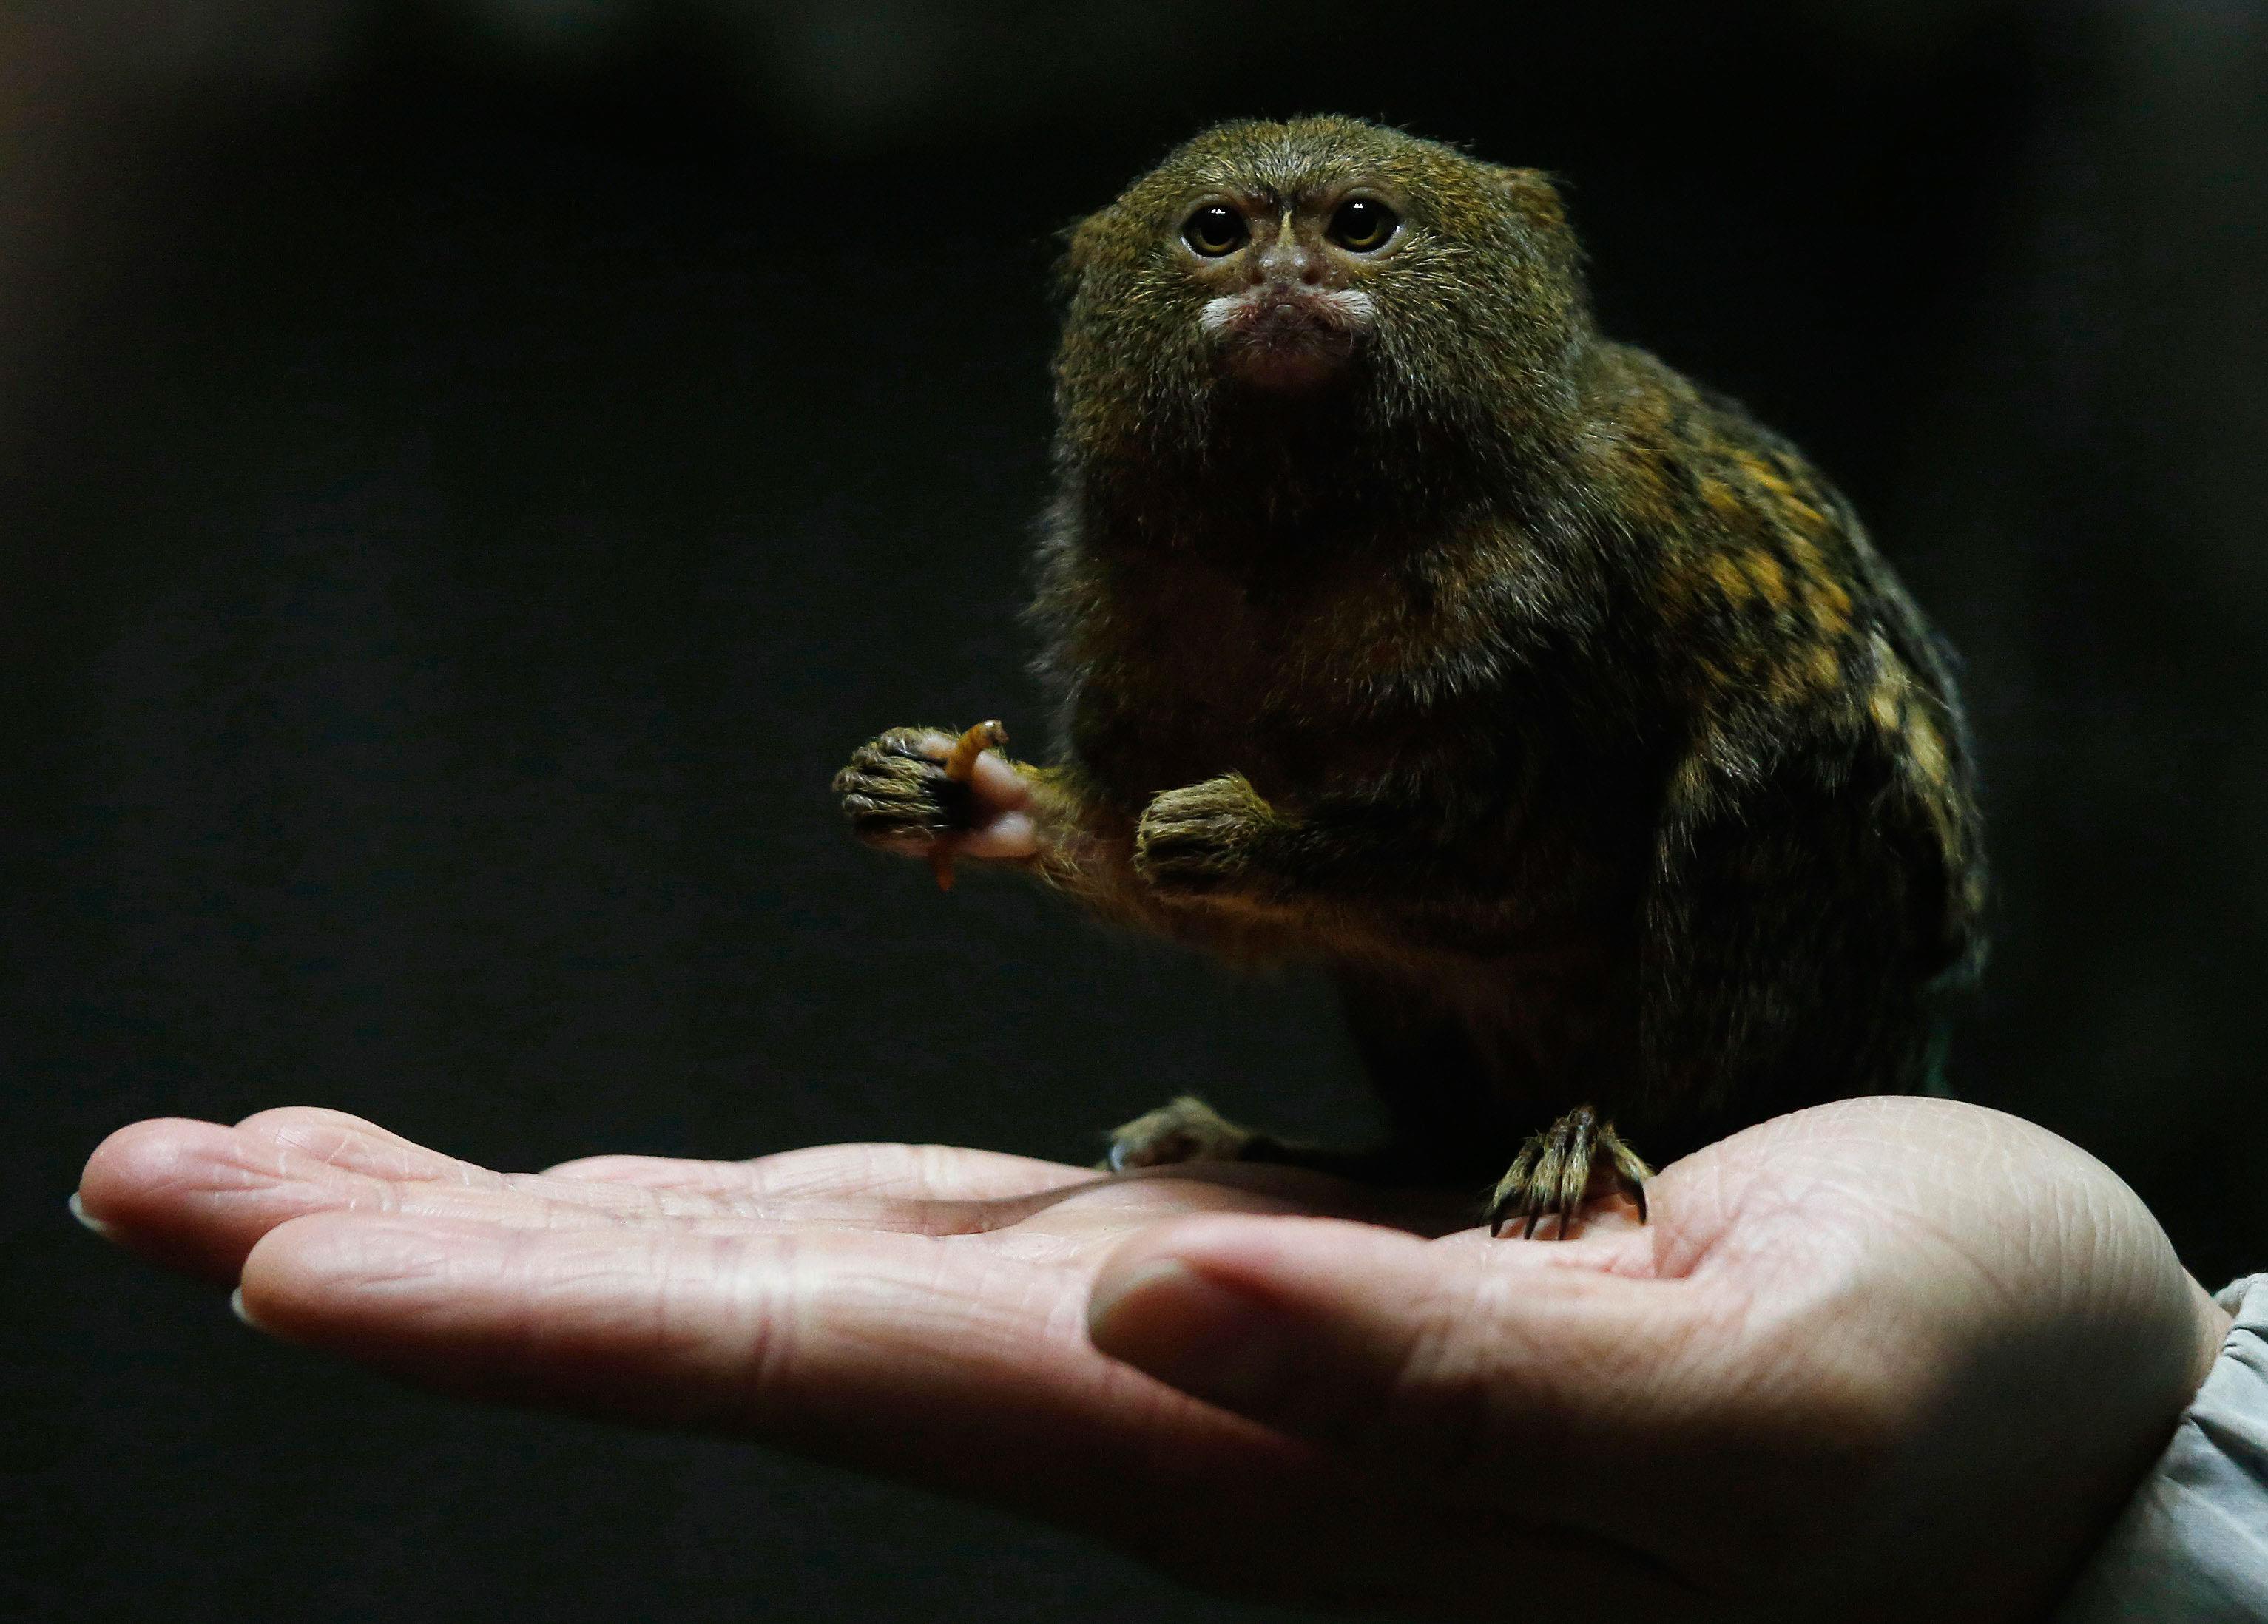 Hong Kong Ocean Park worker poses with a pygmy marmoset, the world's smallest monkey, in Hong Kong